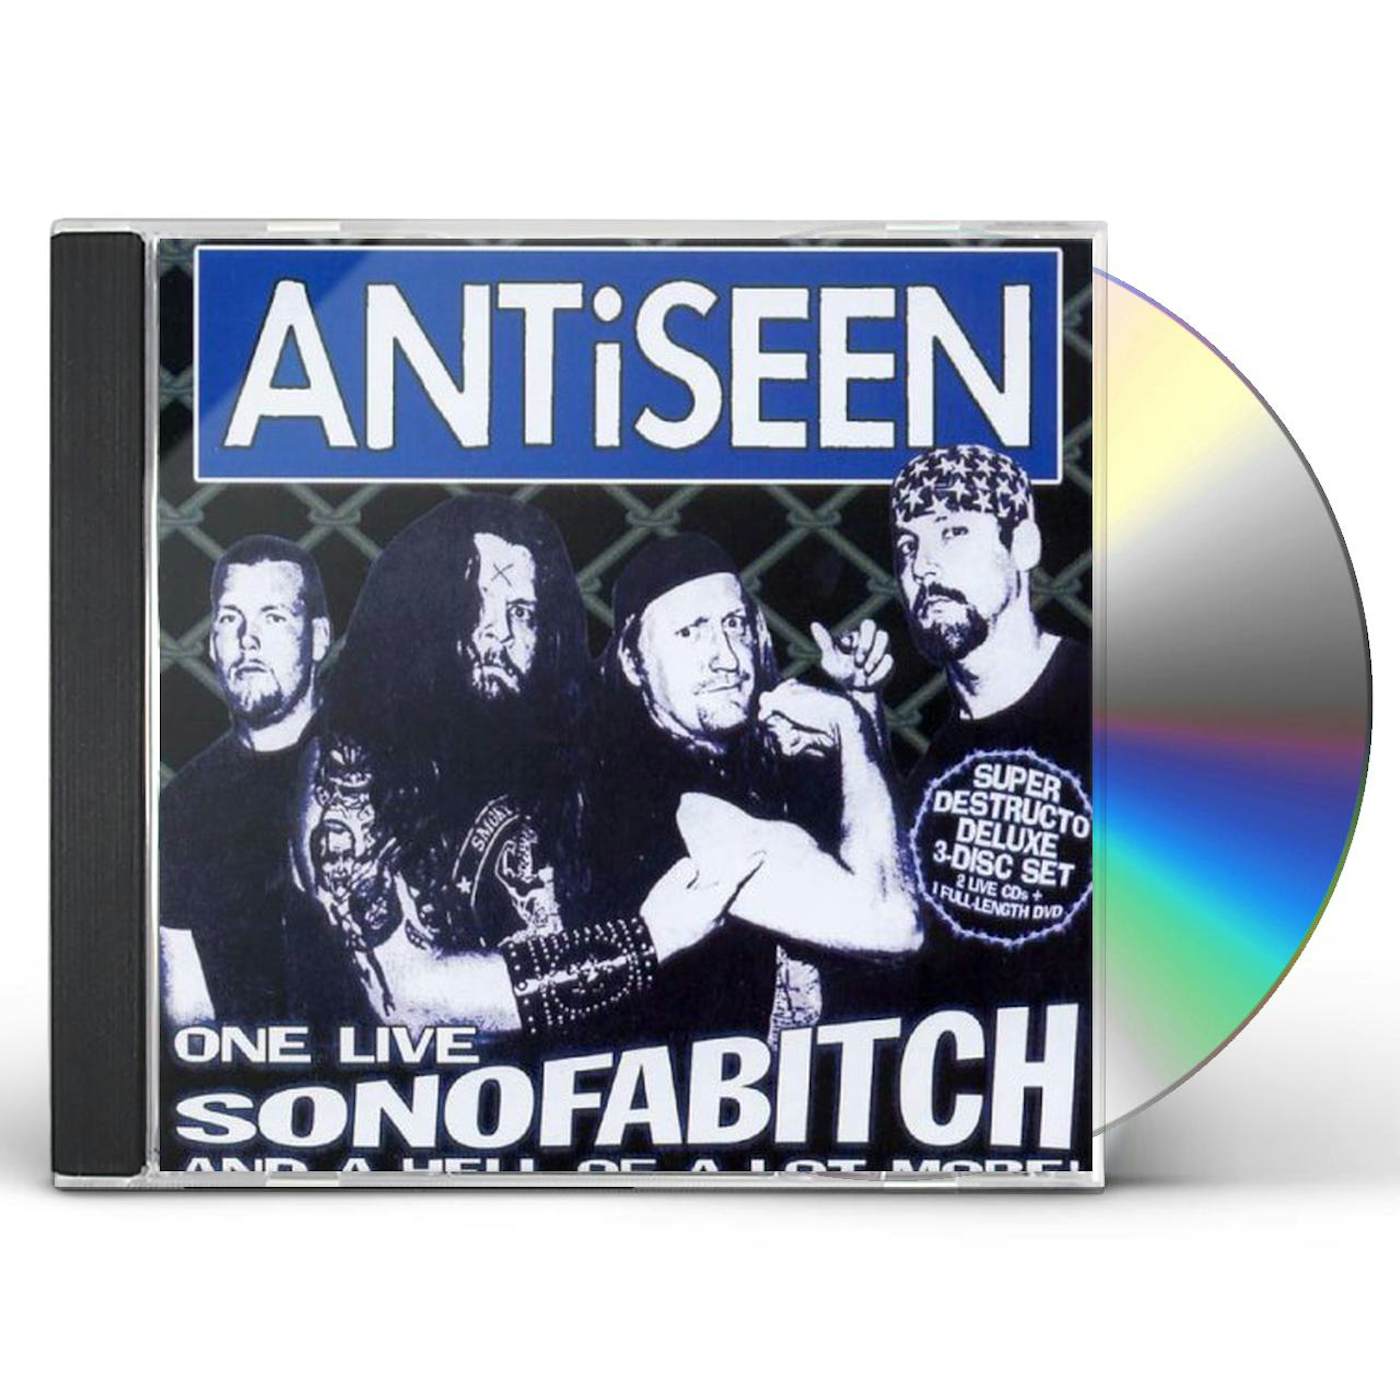 Antiseen ONE LIVE SONOFABITCH & A HELL OF A LOT MORE CD